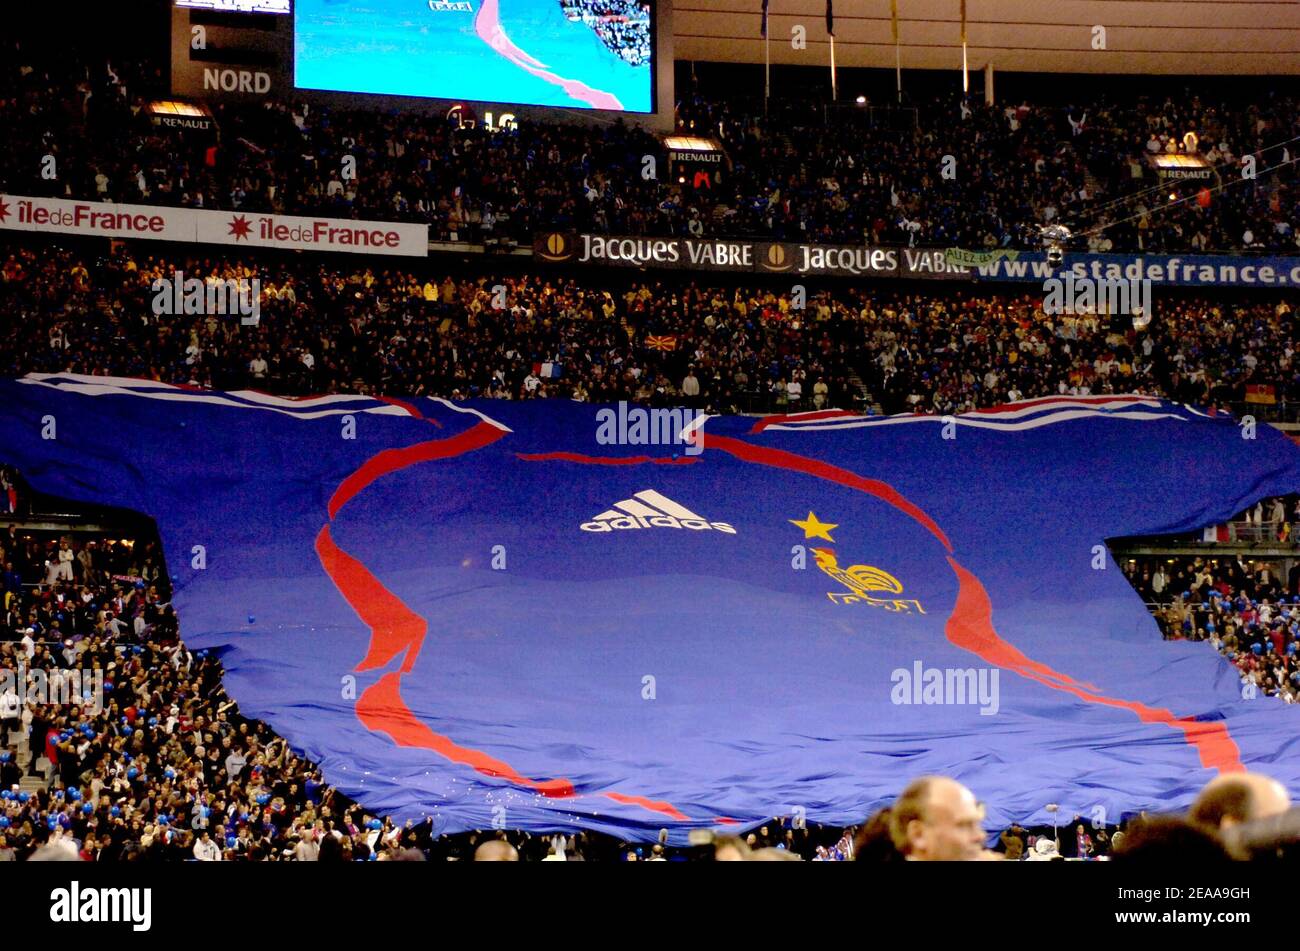 Giant shirt of football Adidas during the international friendly match  between France (O) and Germany (0) at the Stade de France, in Saint-Denis,  France, on November 12, 2005. Photo by Christophe  Guibbaud/CAMELEON/ABACAPRESS.COM